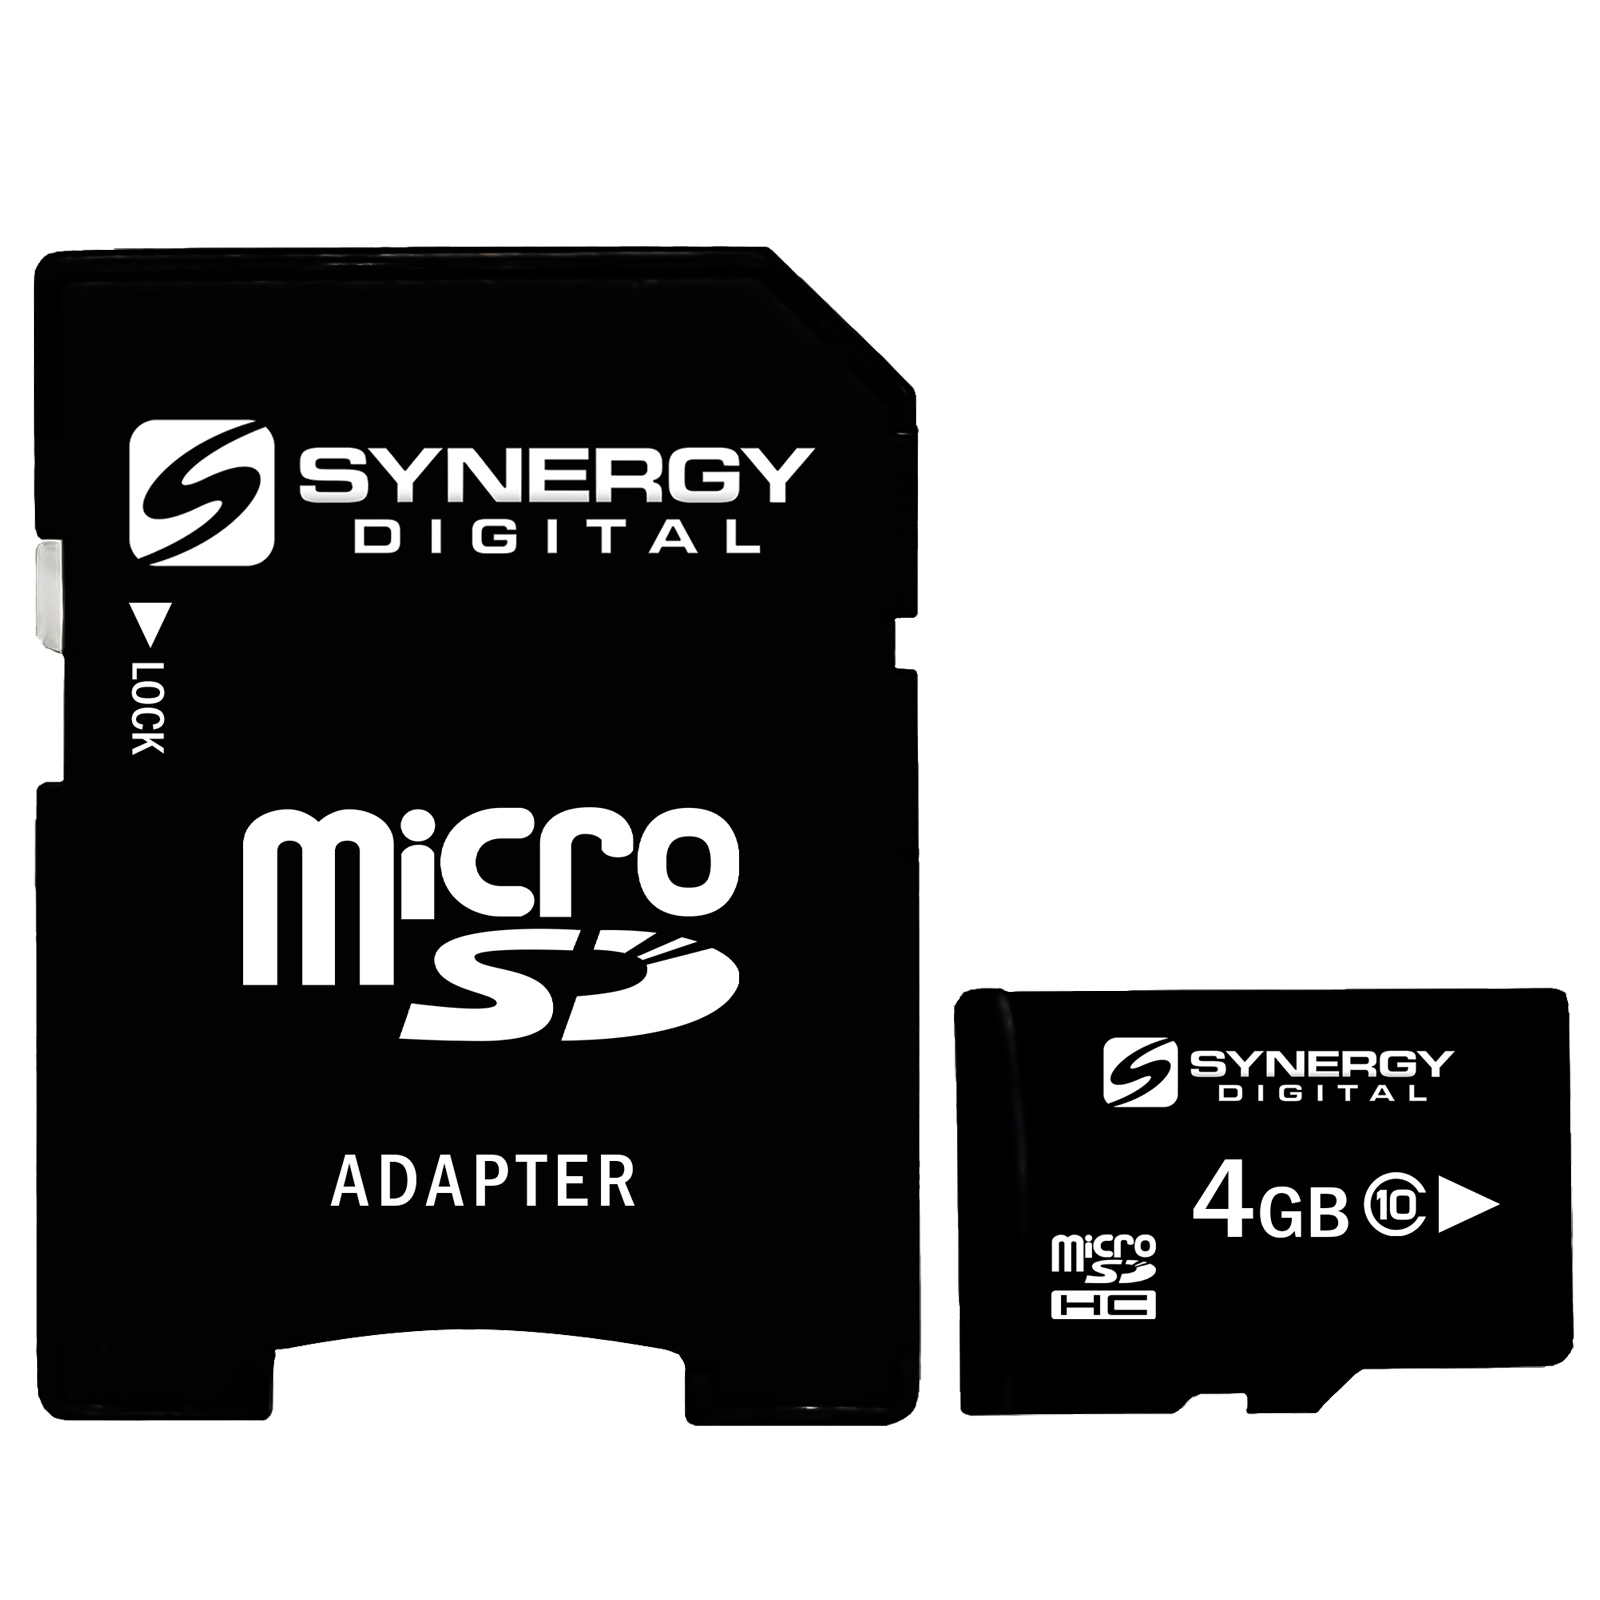 SDC4/4GB | 4GB microSDHC Memory Card with SD Adapter